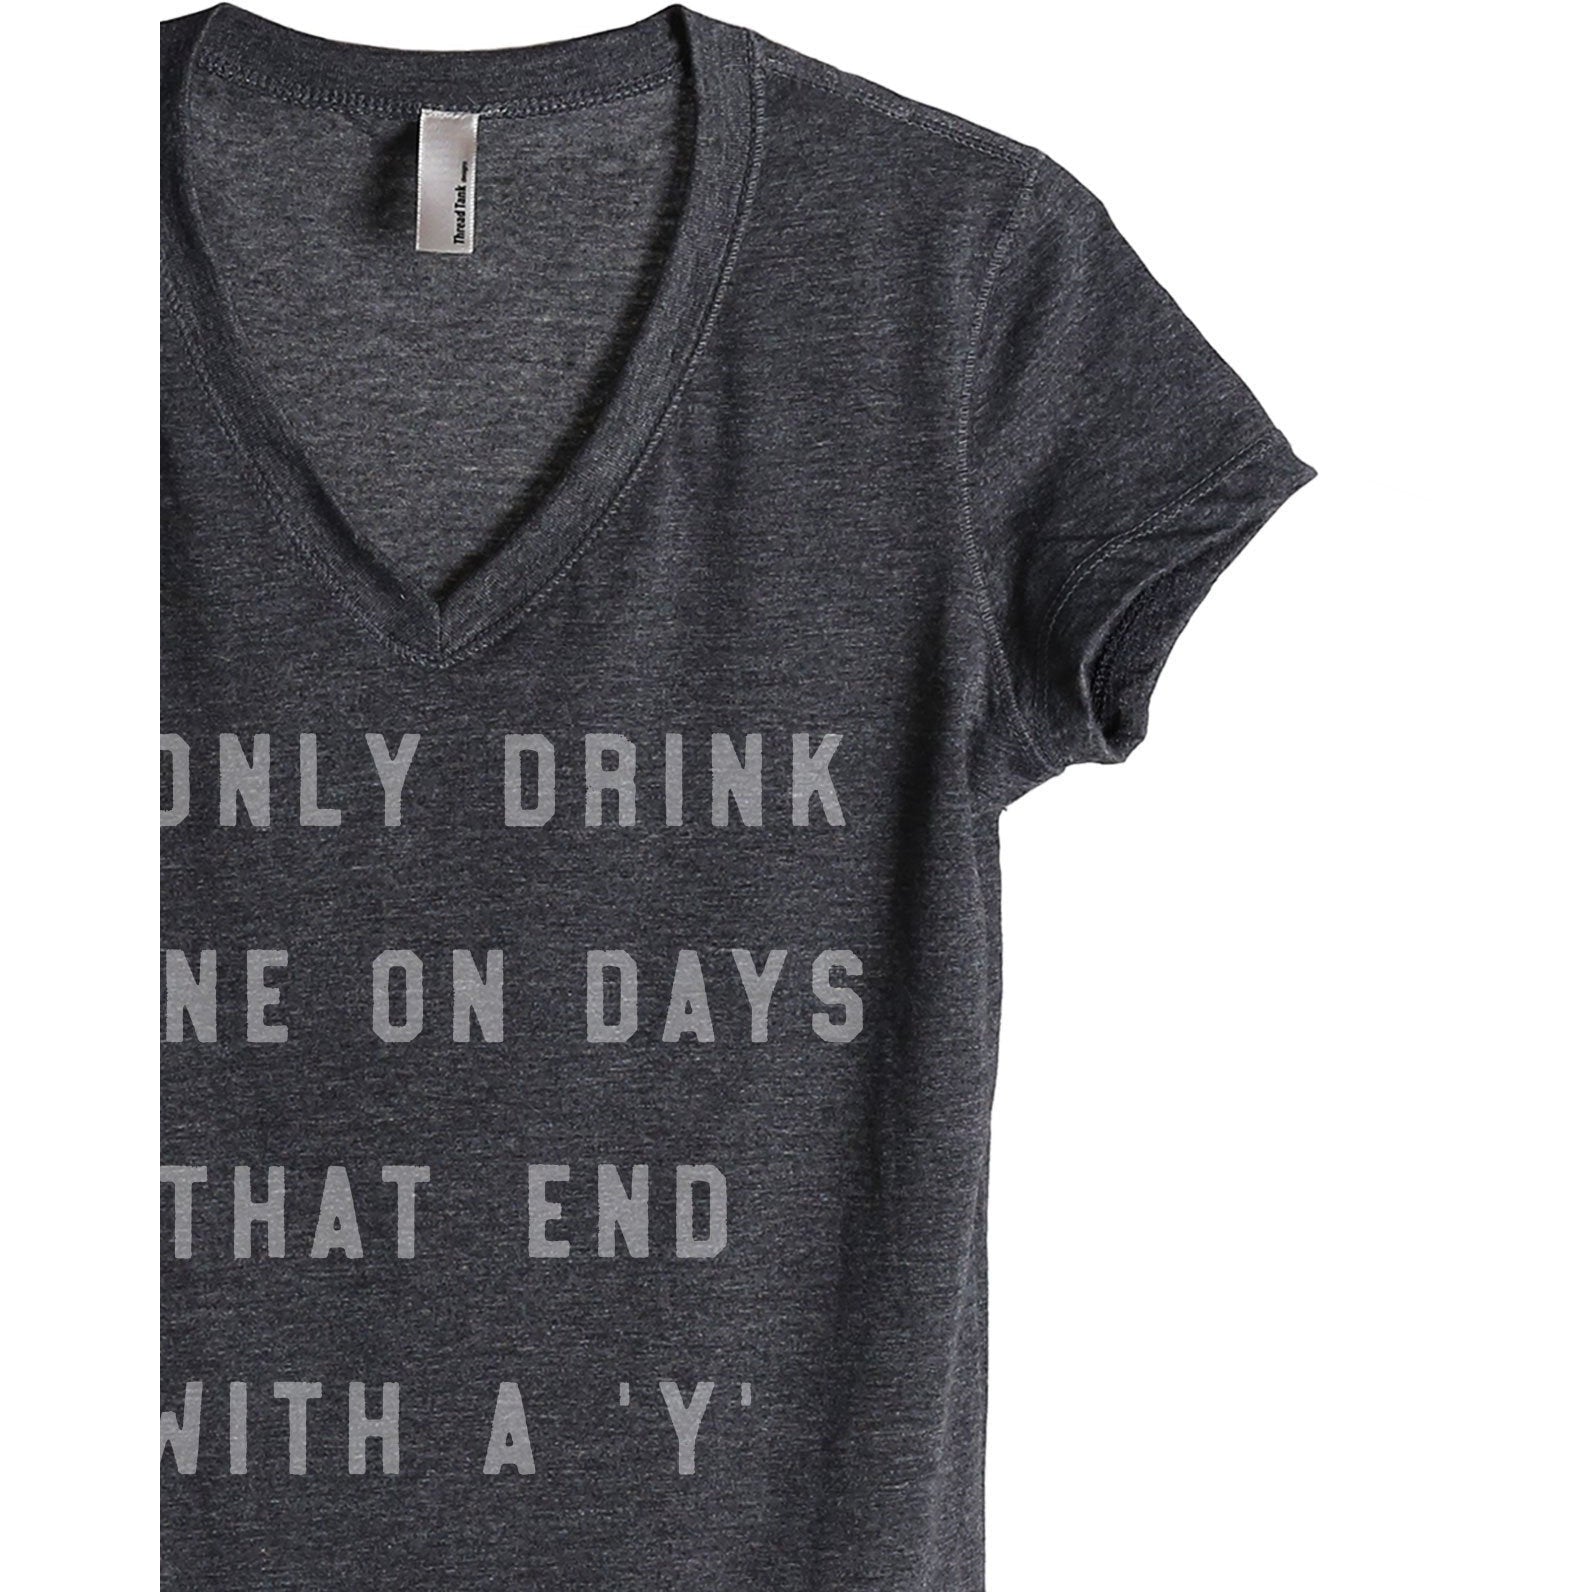 Everything is Fine Thanks to Wine Women's Fashion Relaxed V-Neck T-Shirt  Tee Charcoal Grey Small at  Women's Clothing store